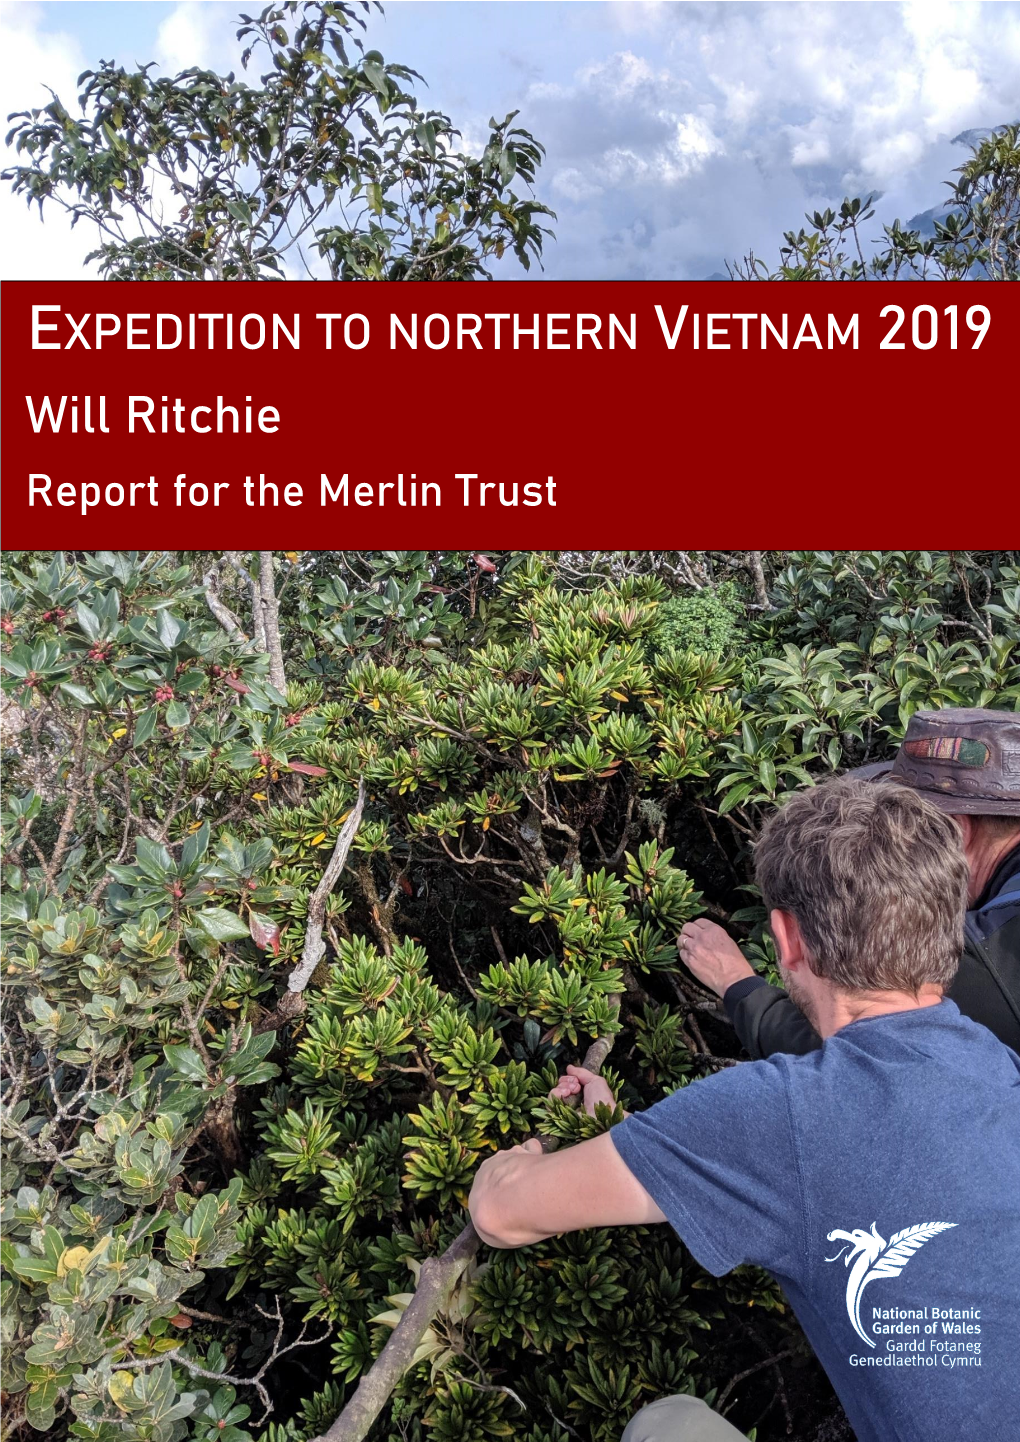 Will Ritchie Report for the Merlin Trust